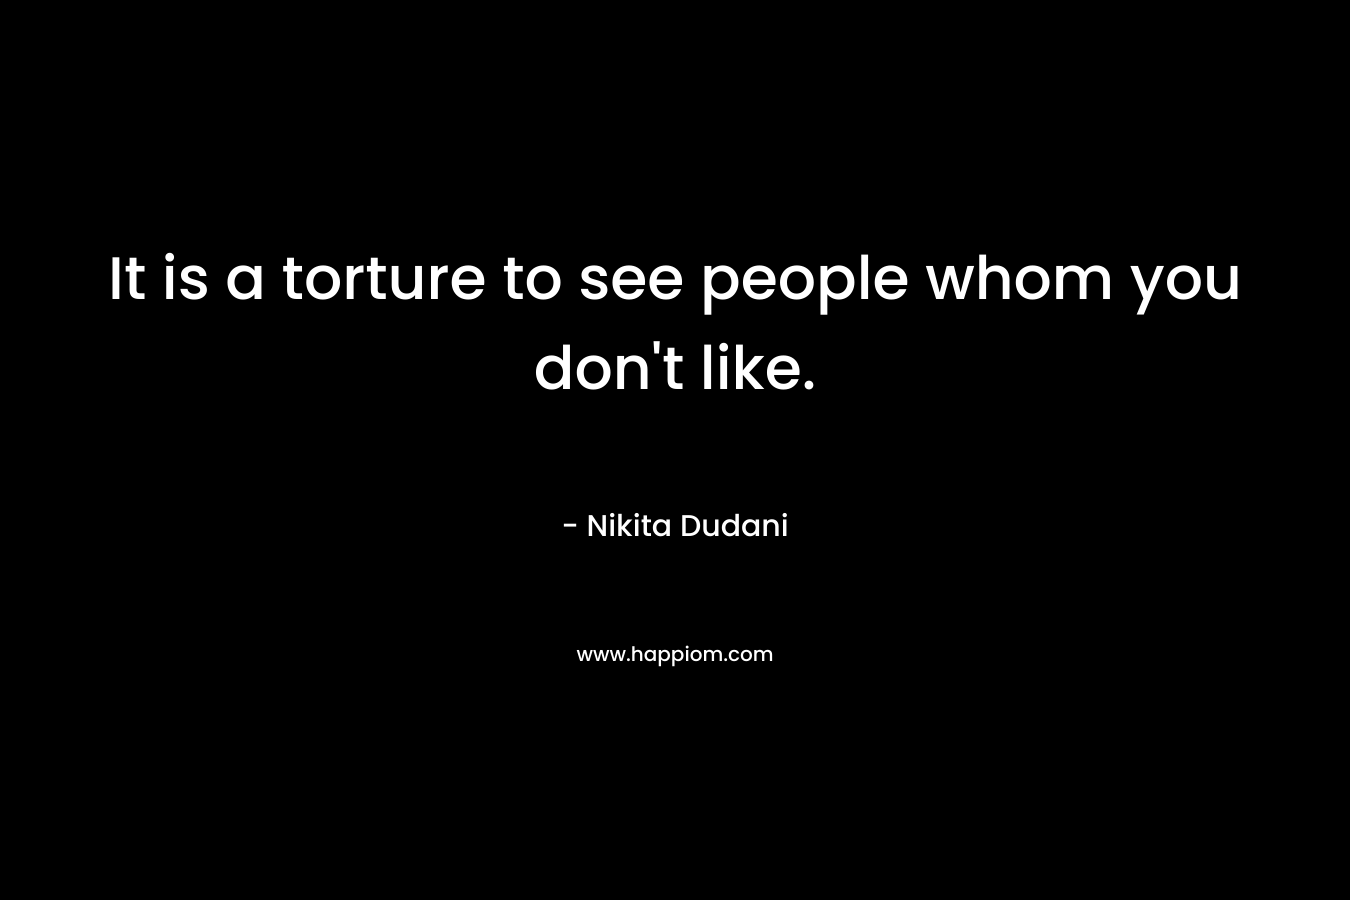 It is a torture to see people whom you don't like.